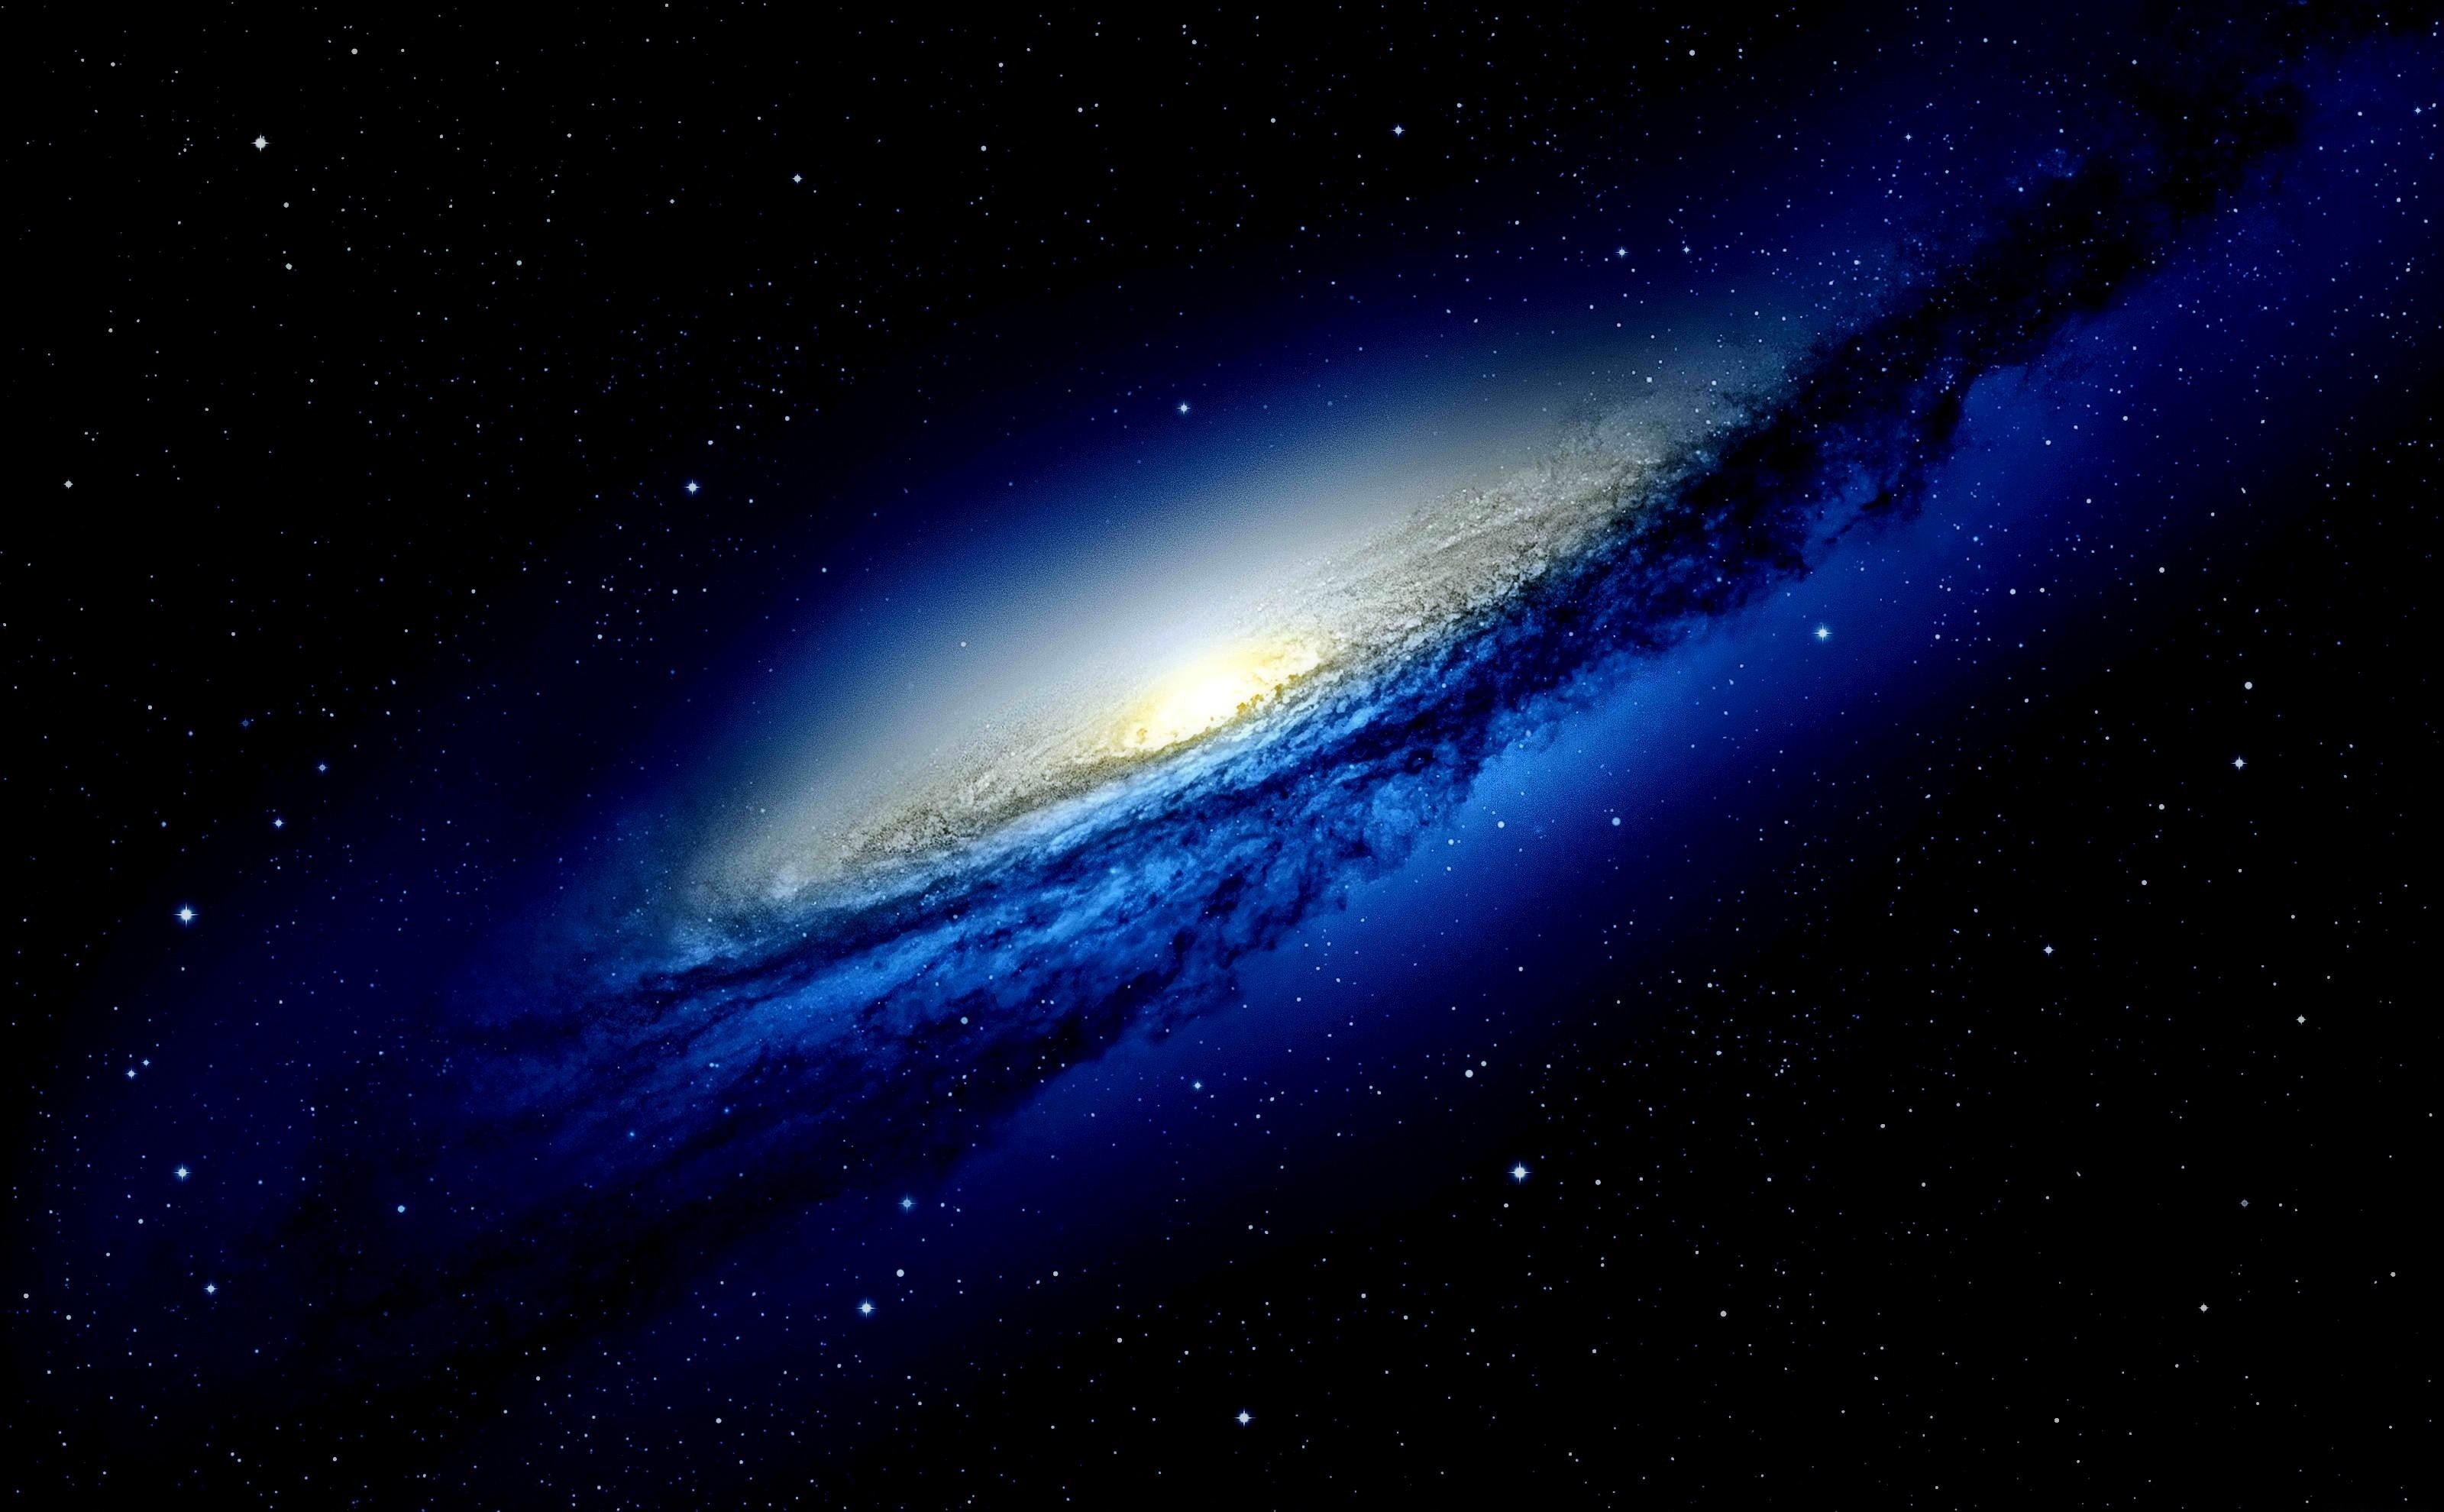 Preview blue galaxy in deep space